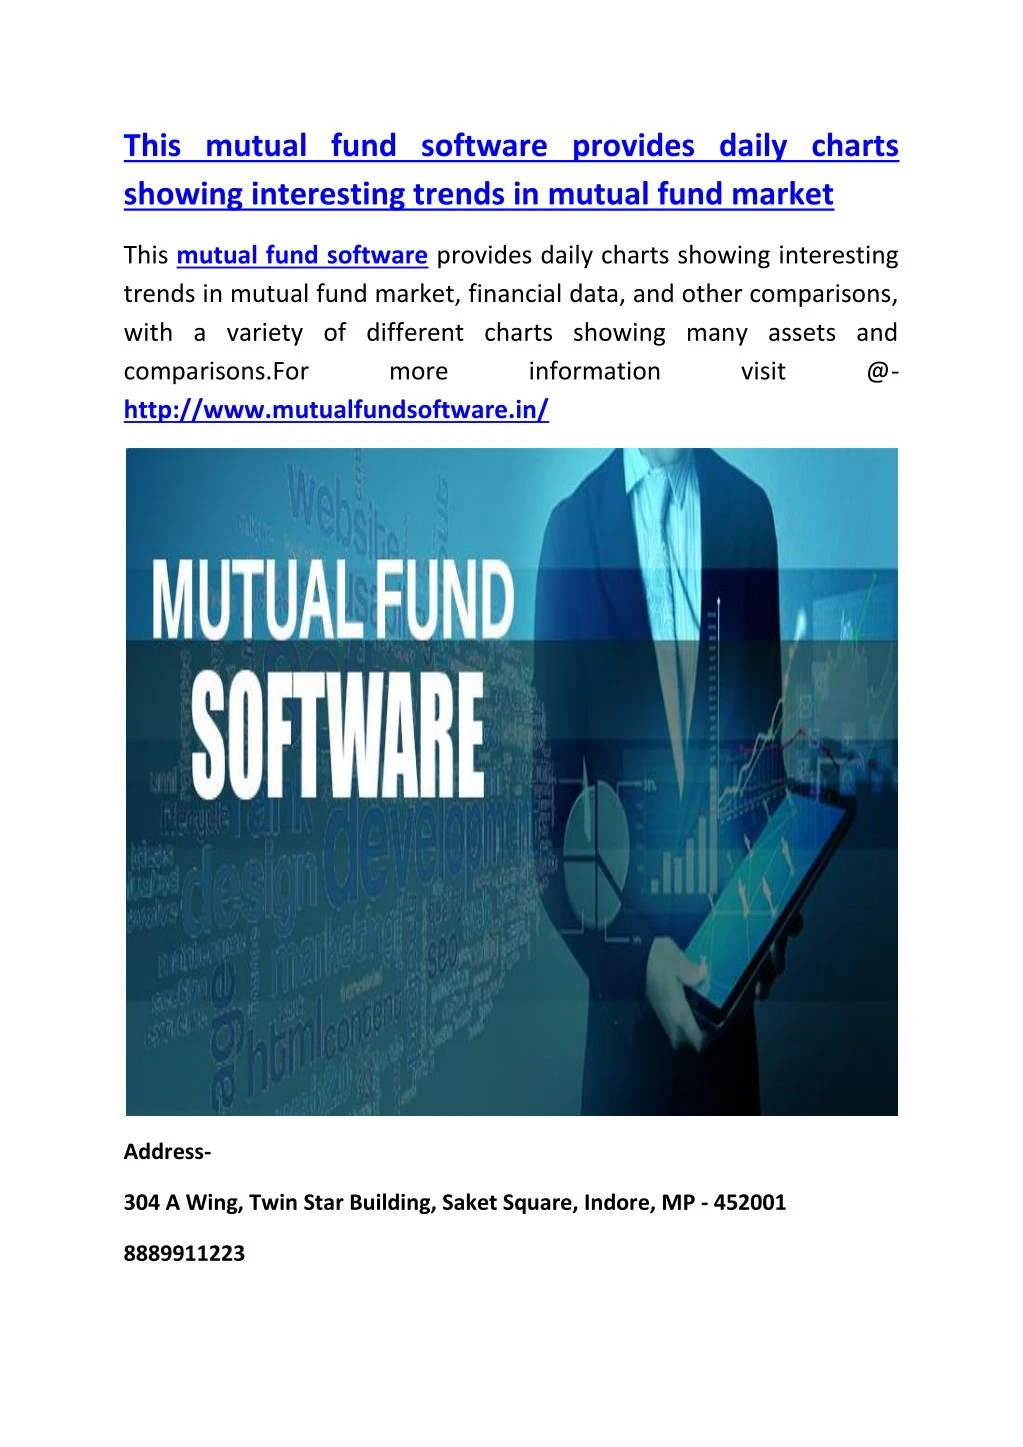 this mutual fund software provides daily charts